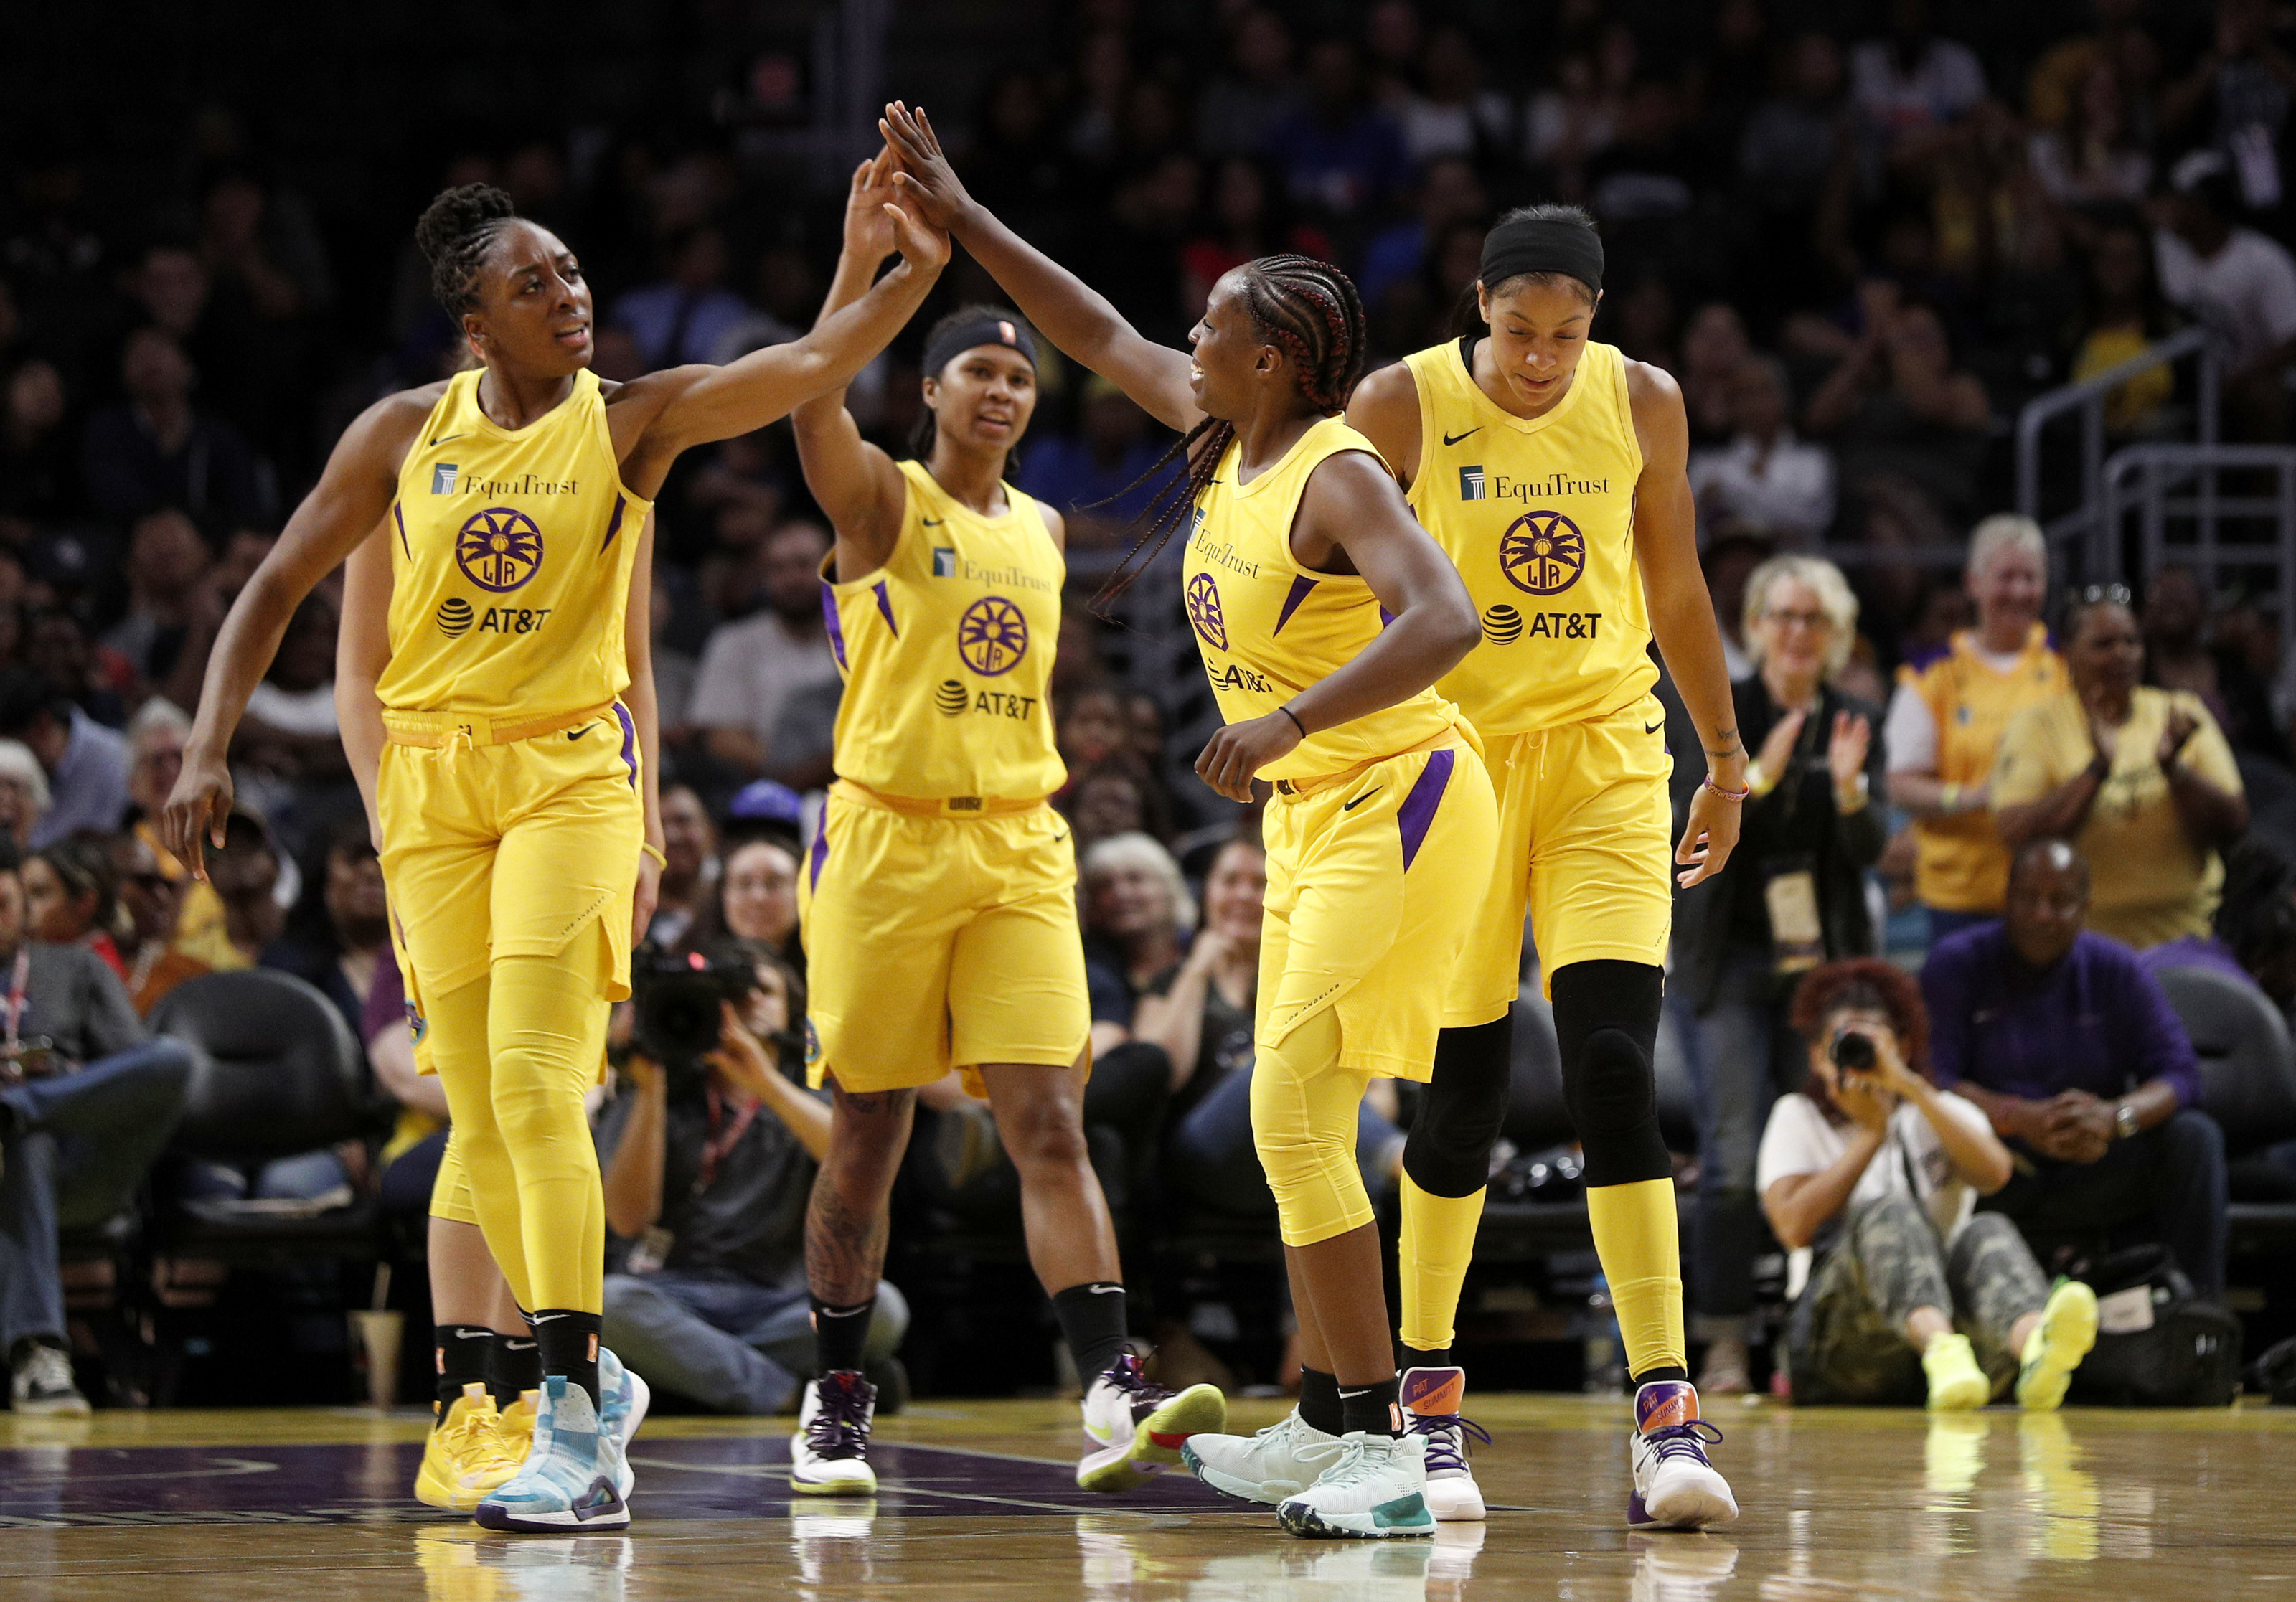 Los Angeles Sparks on X: BREAKING! Our training camp roster has been  released! Leading the way for your LA Sparks is the 2017 Best WNBA Player  ESPY Award Winner @Candace_Parker. Who are